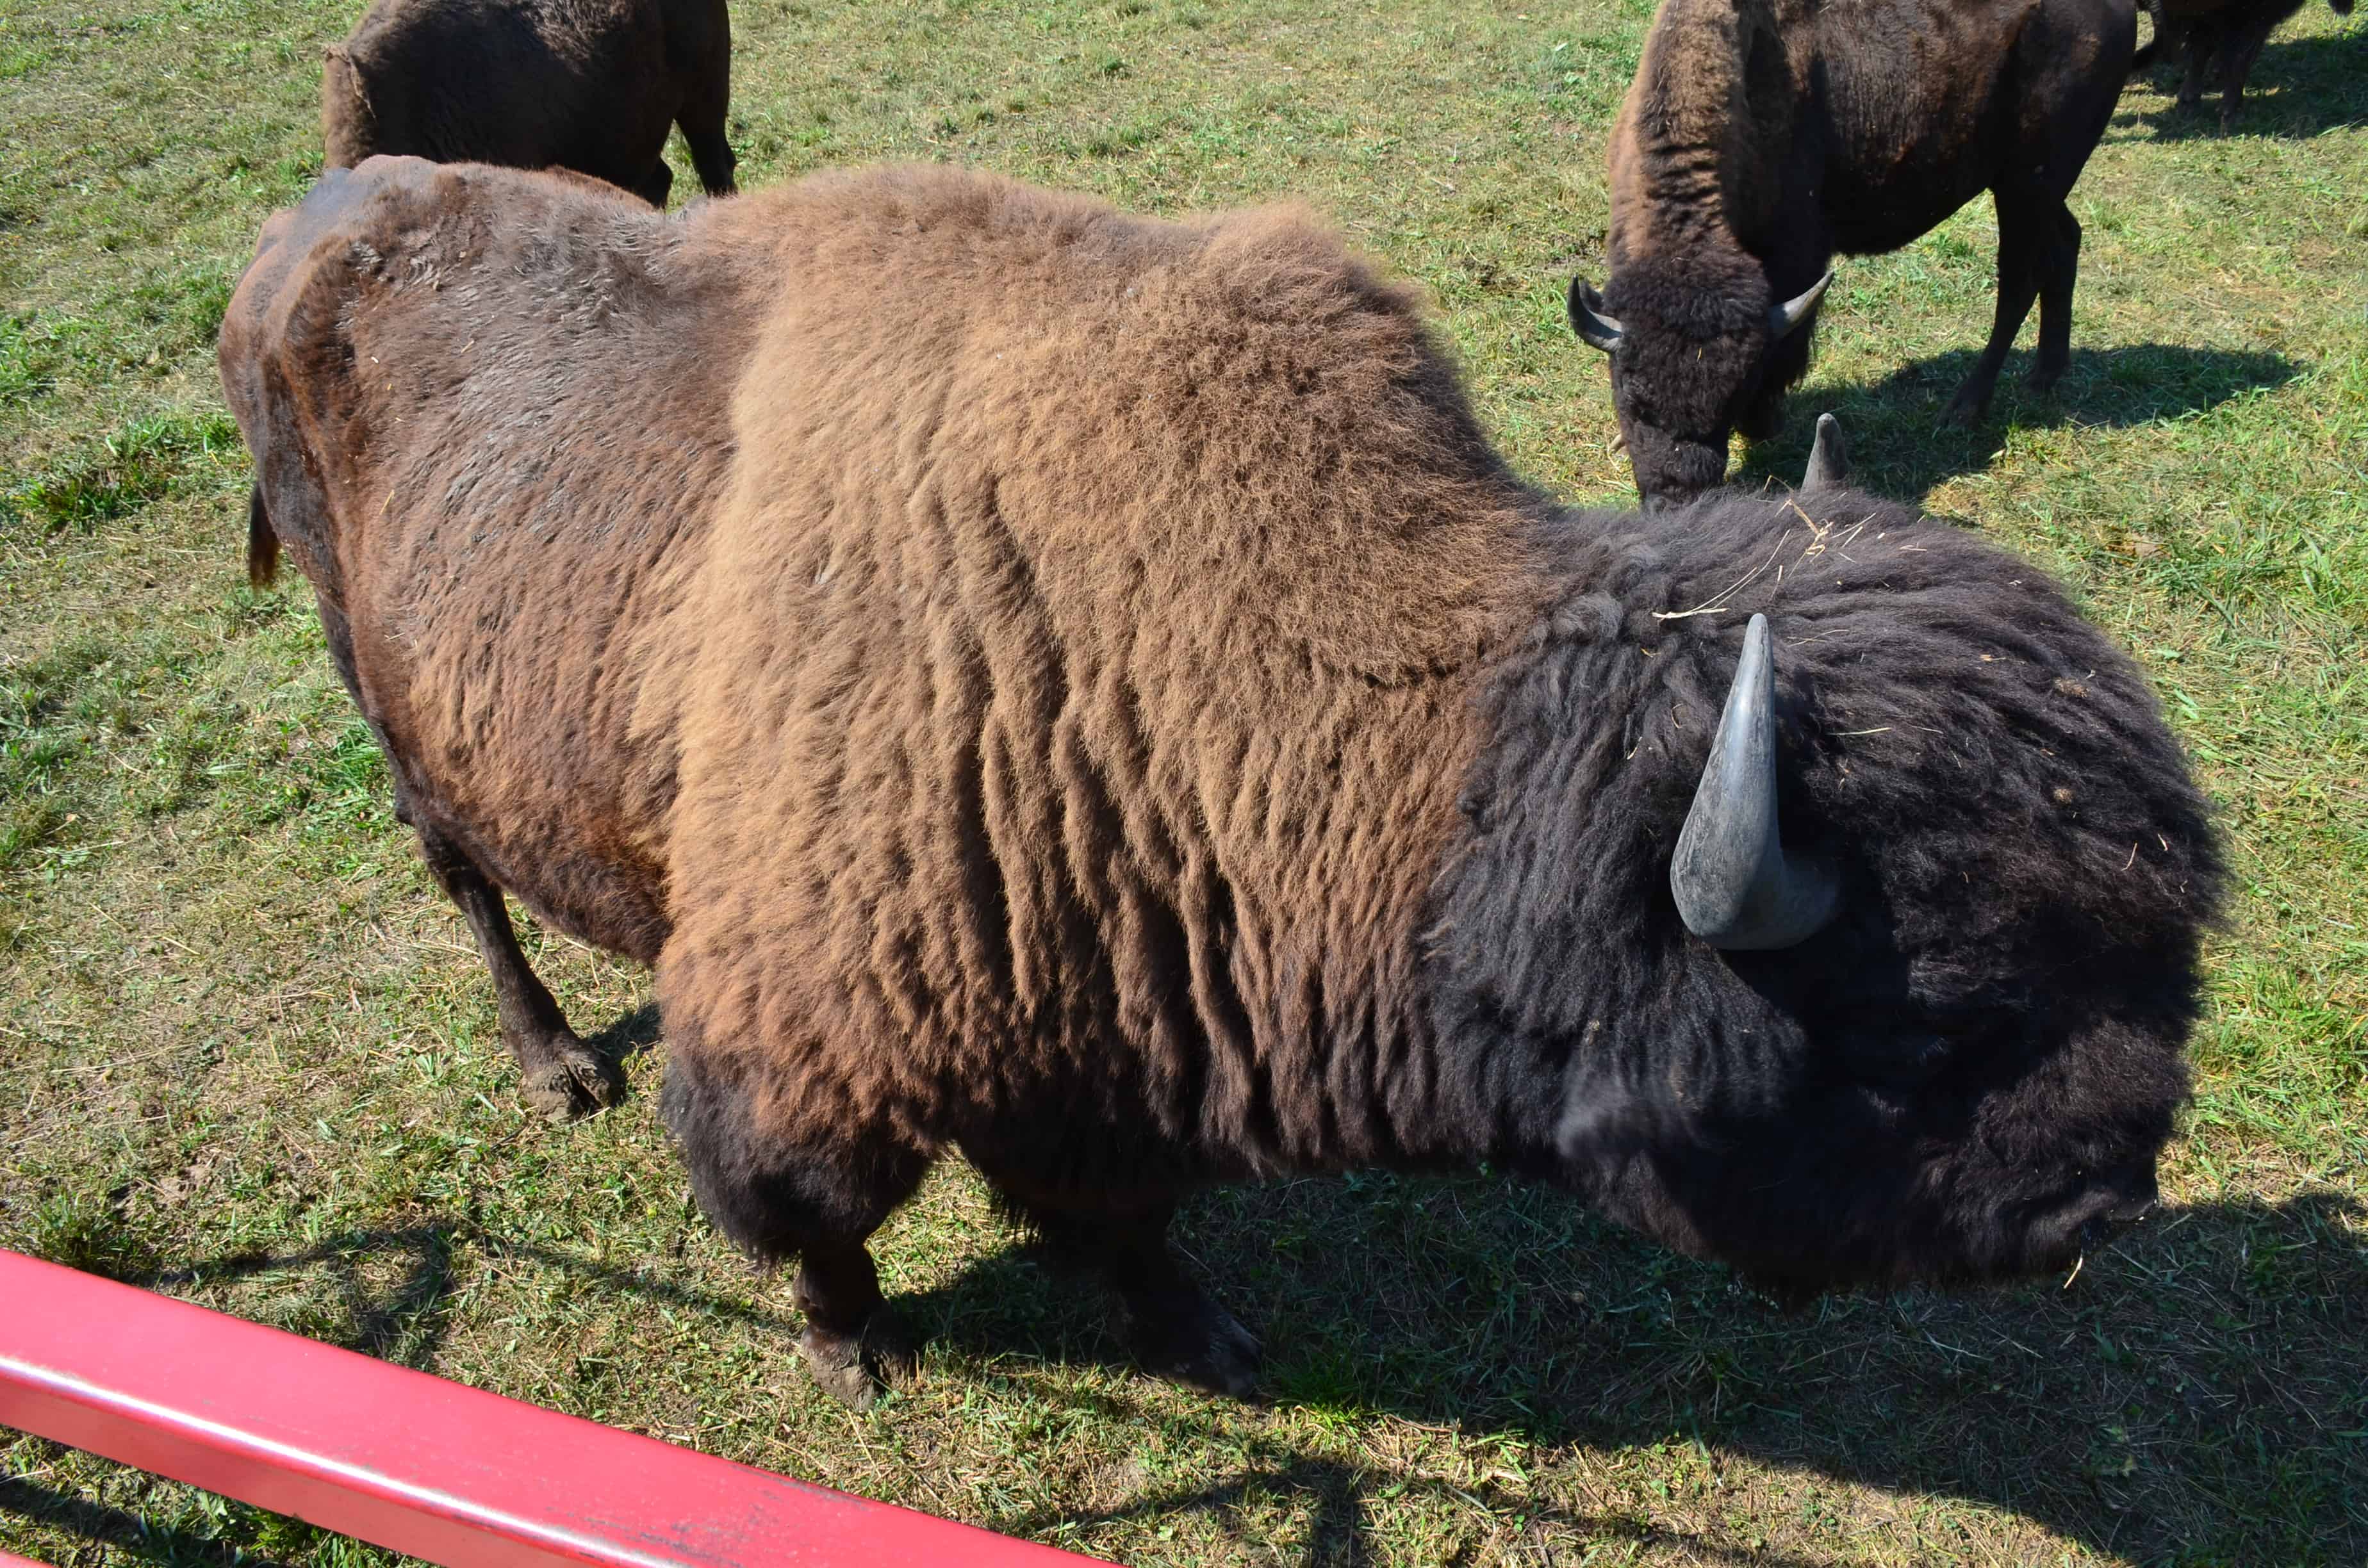 One of the bigger bison at the ranch